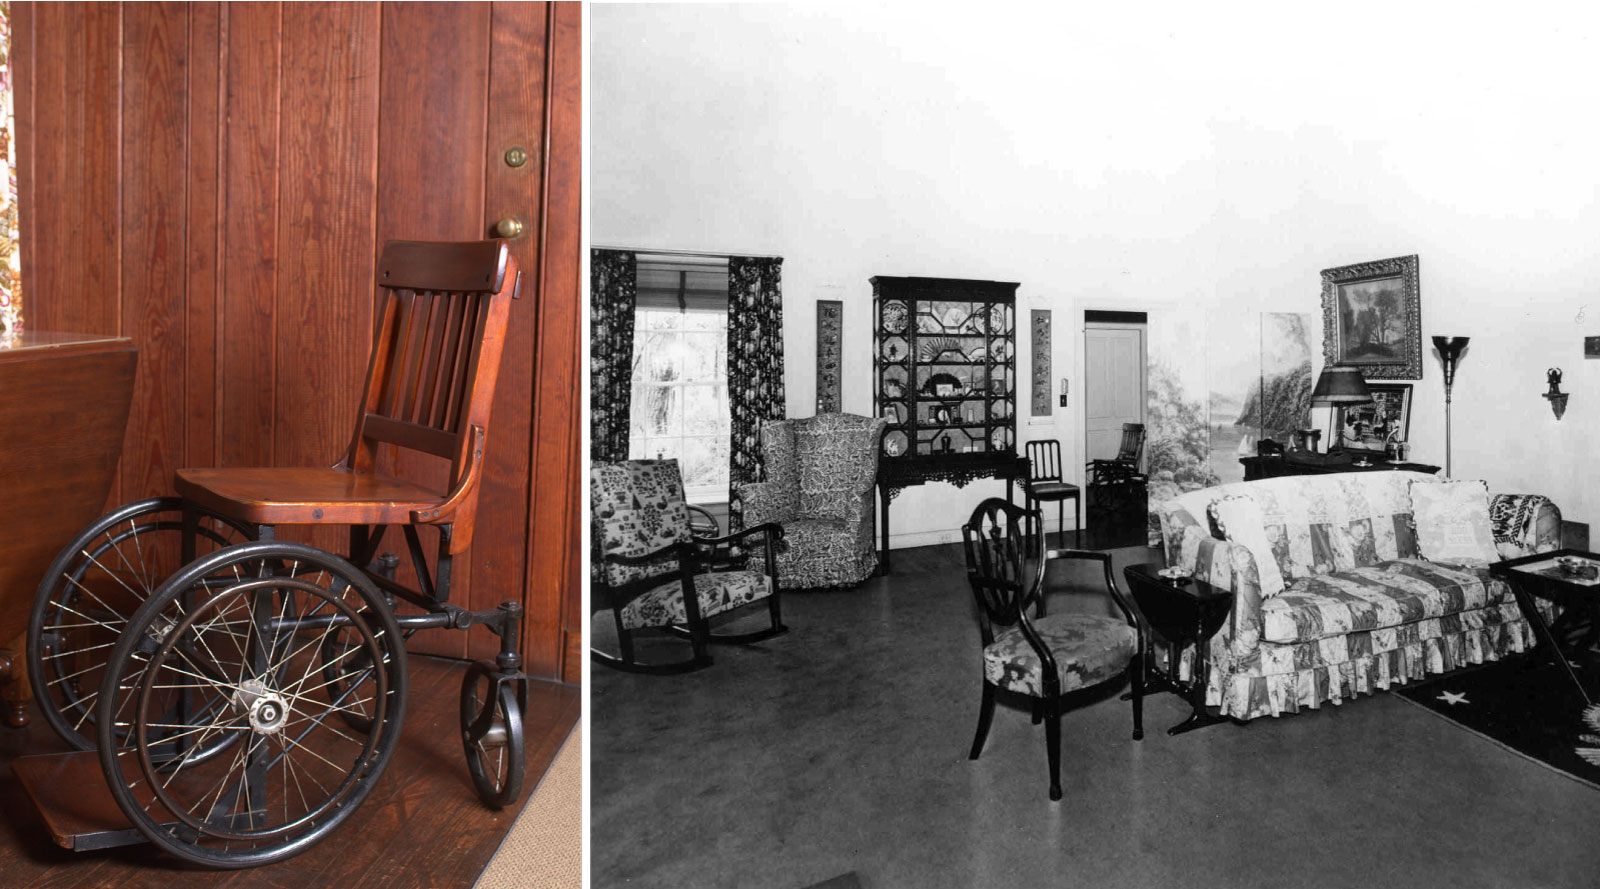 A whhelchair on left and a photo of a room on right.